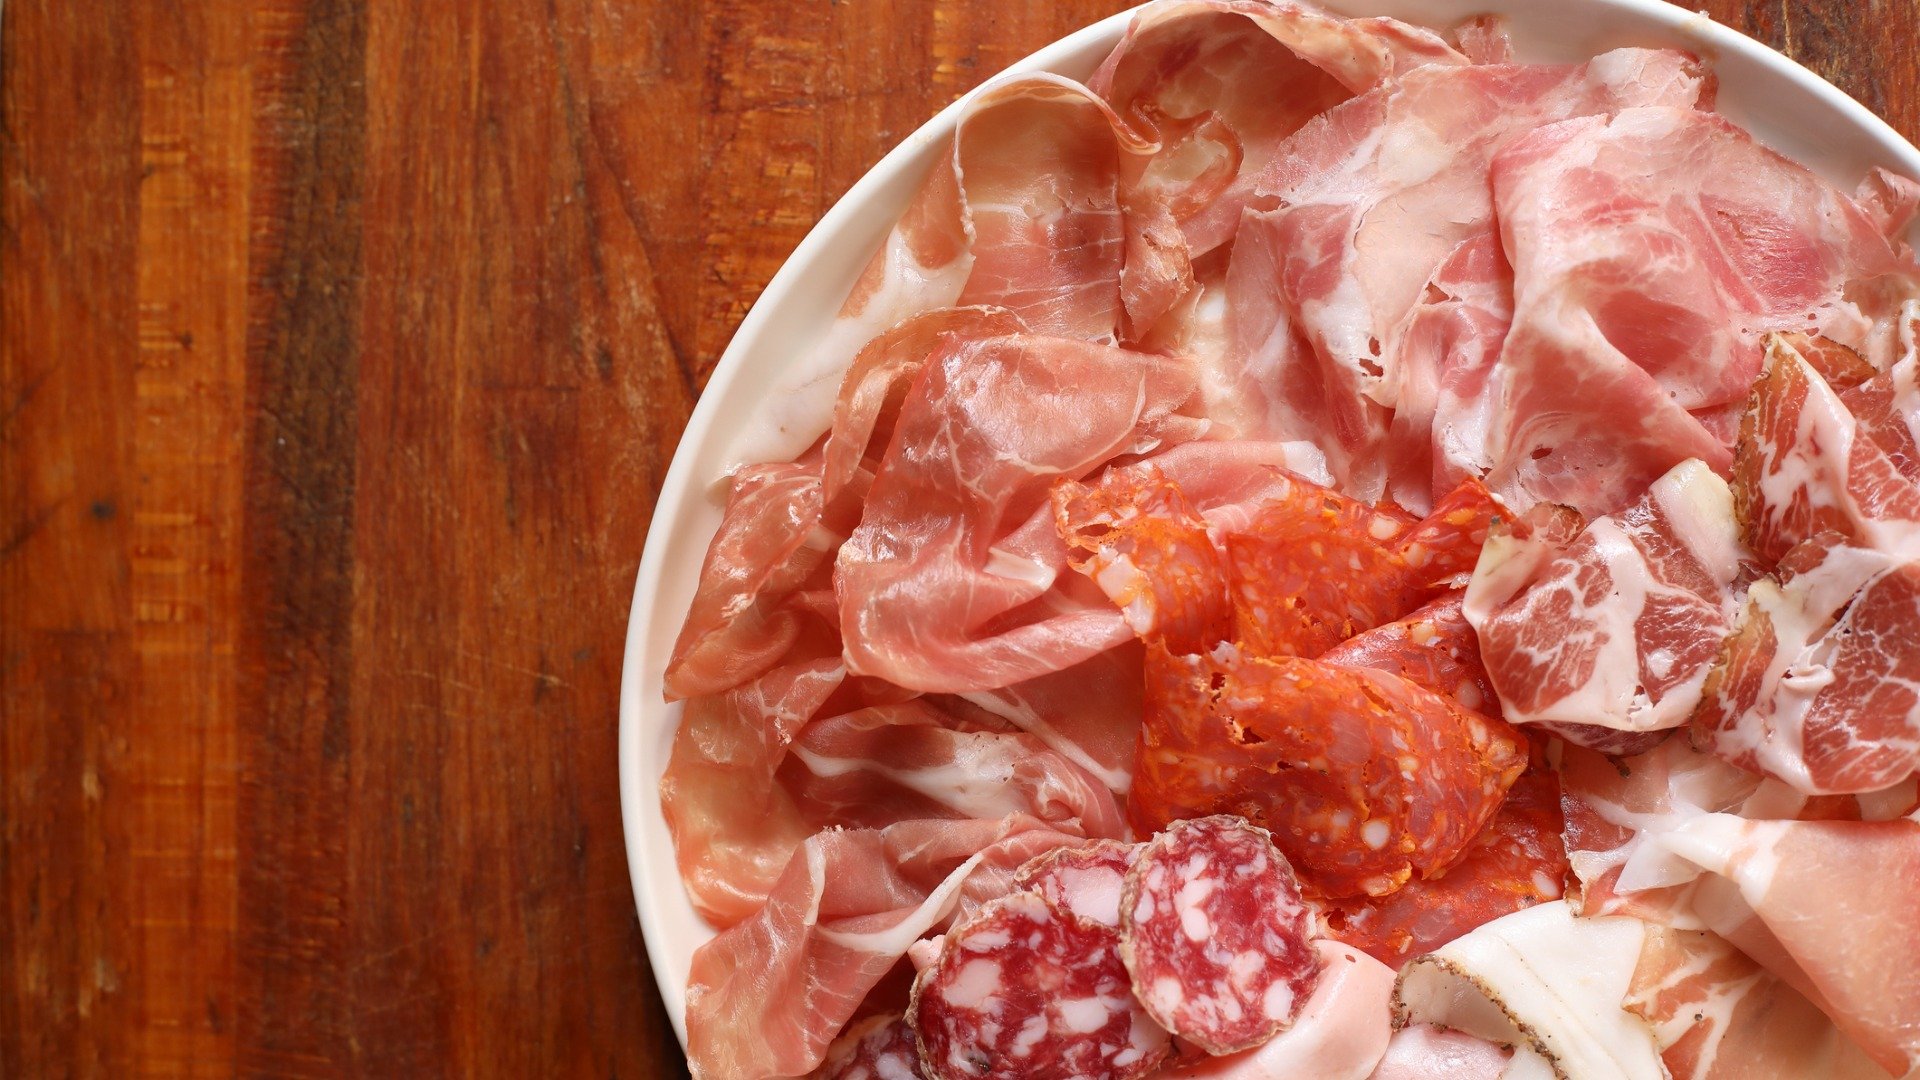 This is a plate filled with Italian cold cuts, like salami, prosciutto etc. 